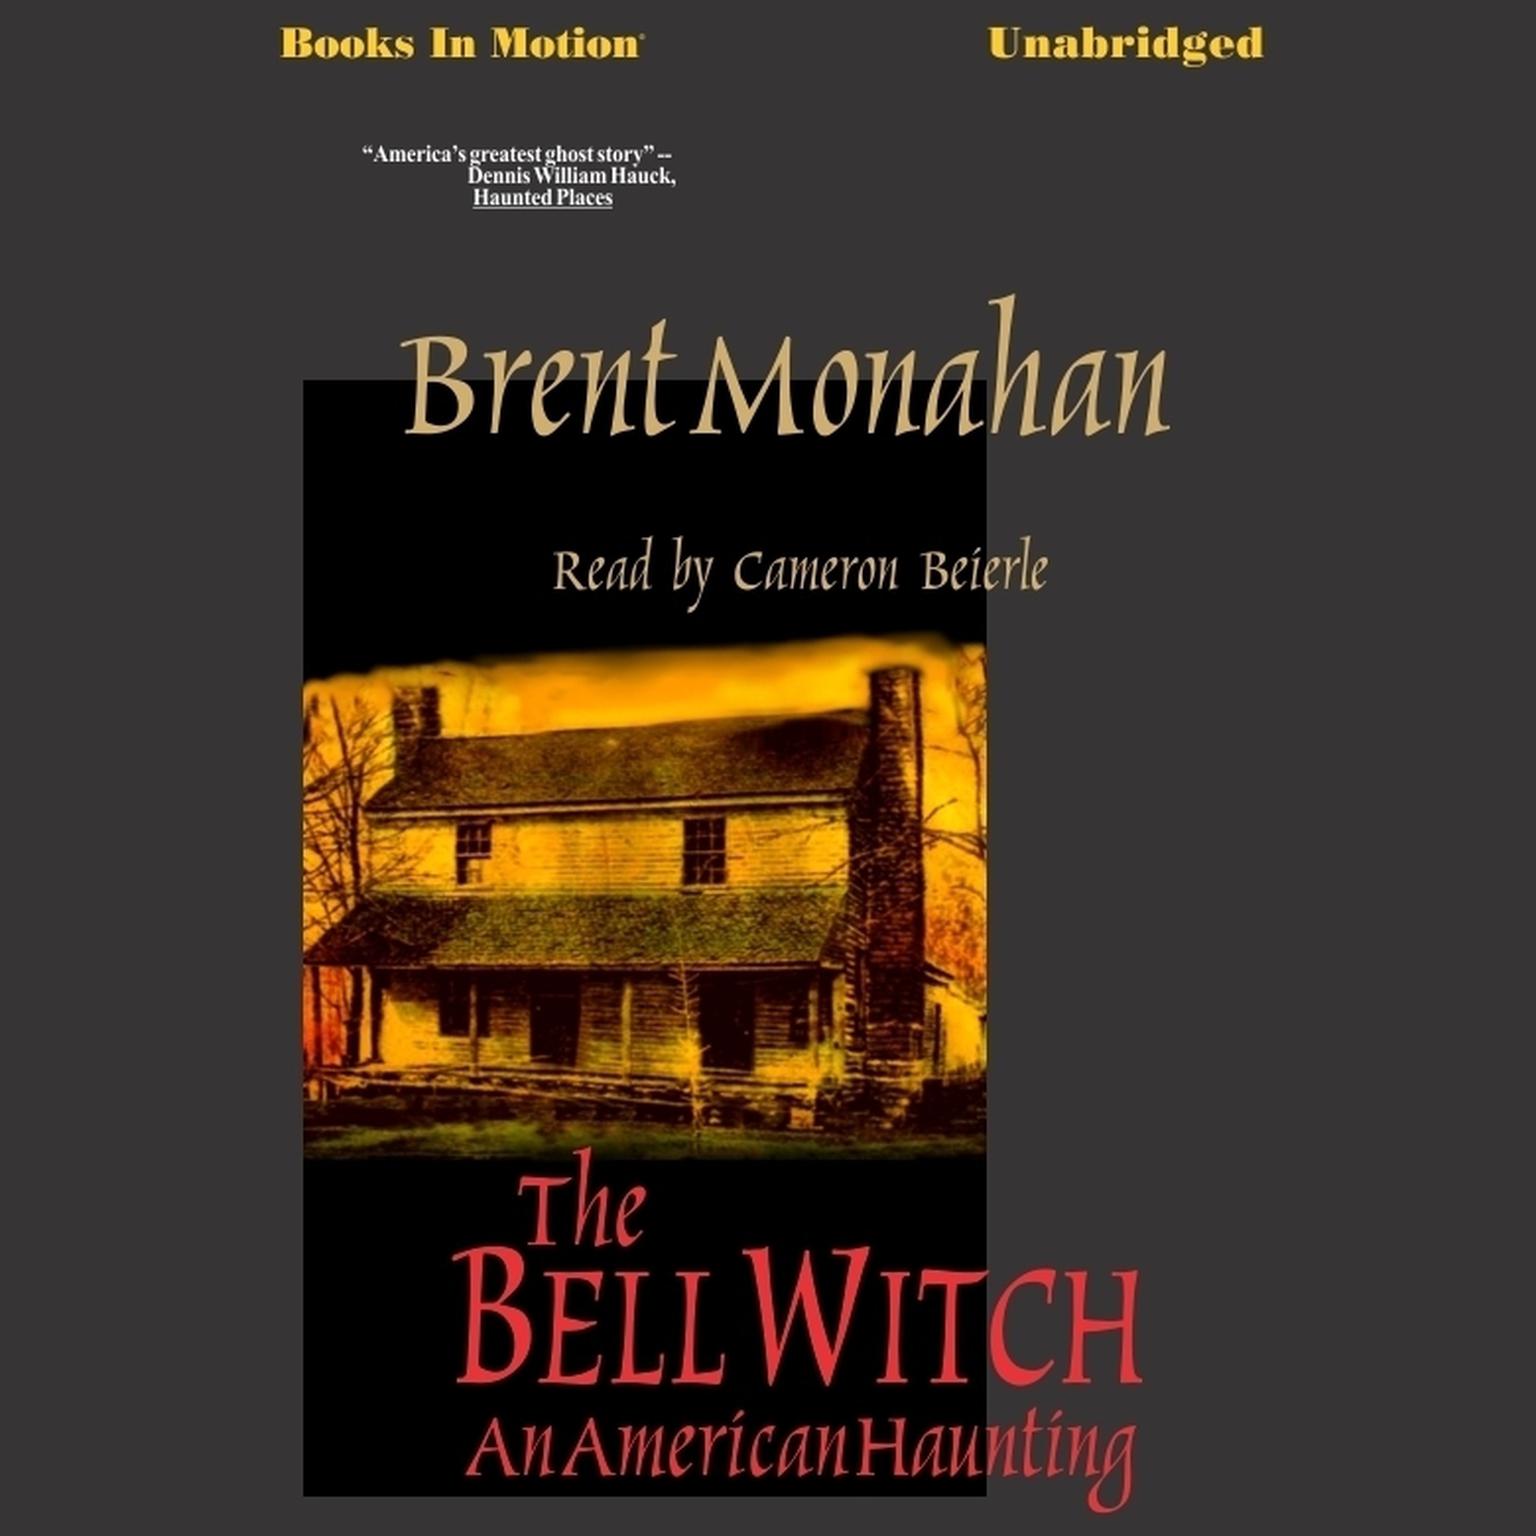 The Bell Witch Audiobook, by Brent Monahan